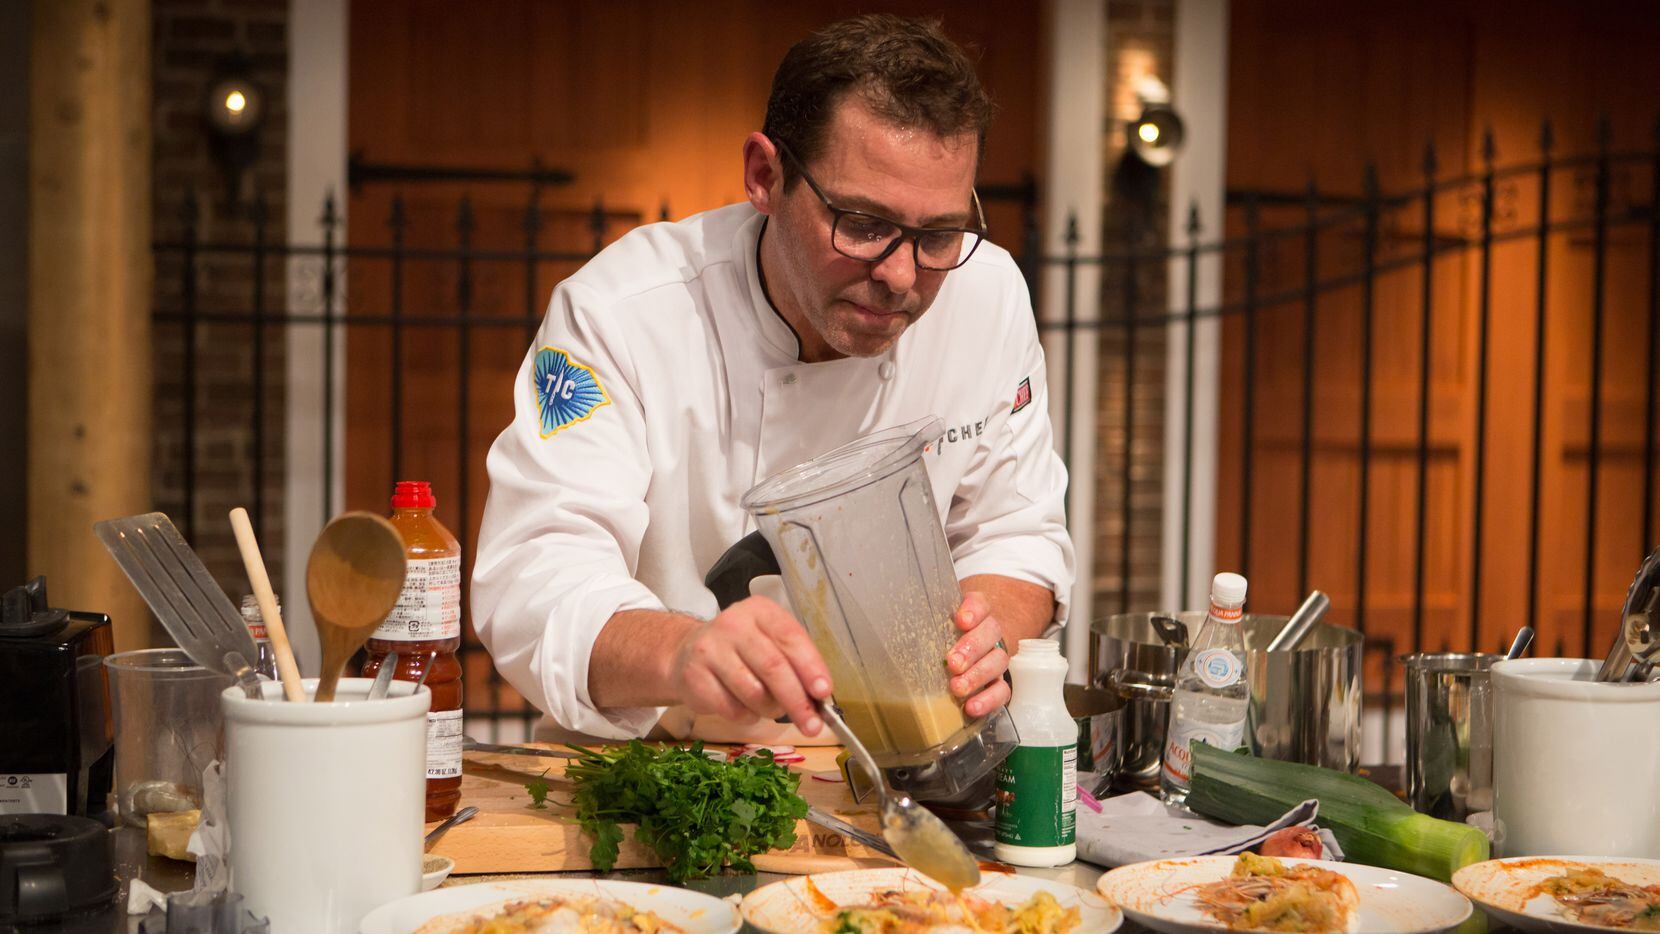 John Tesar, who has been called Dallas 'most hated' chef, returned to 'Top Chef' Season 14...